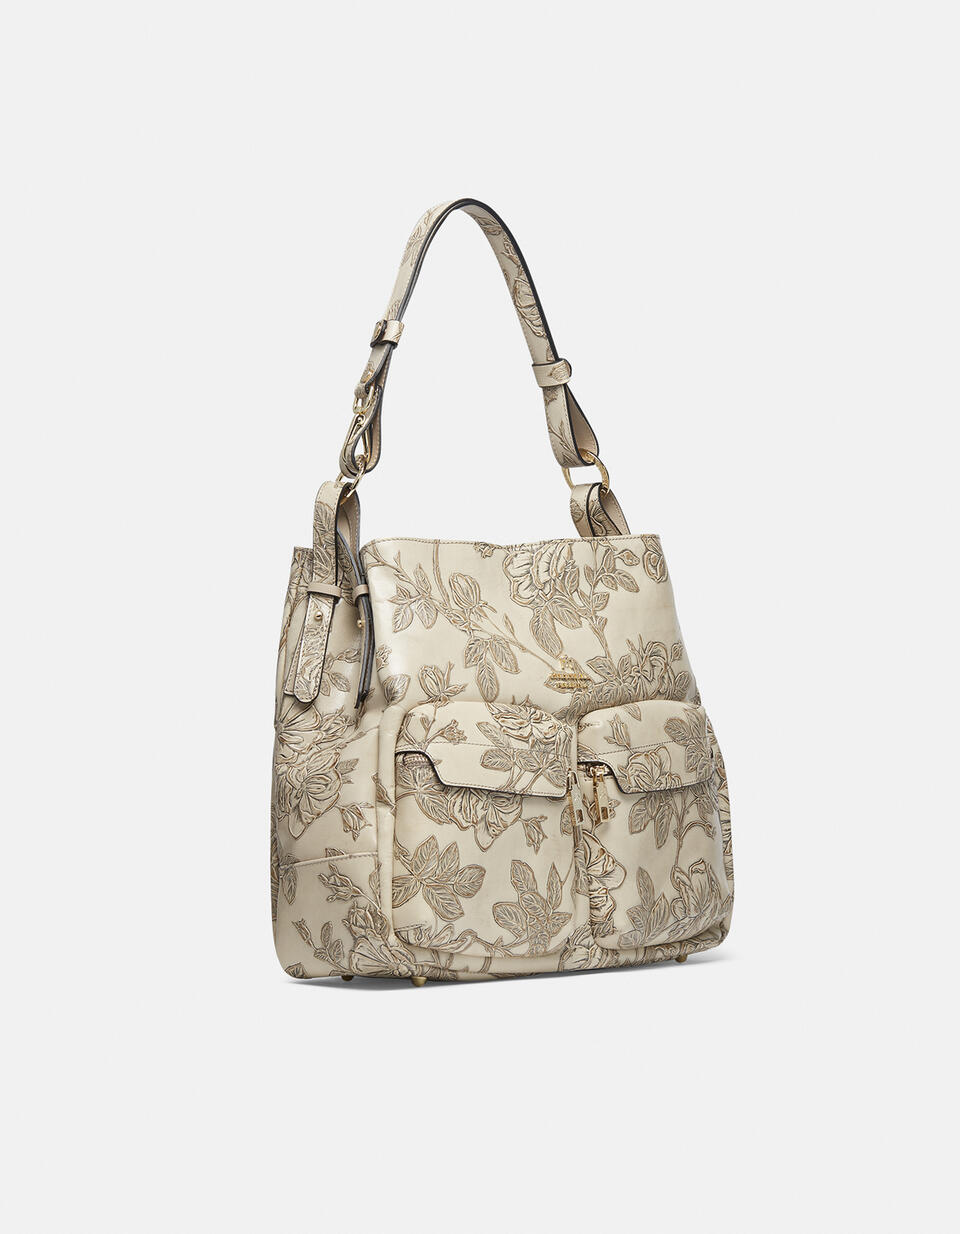 Large bag with shoulder strap - Shoulder Bags - WOMEN'S BAGS | bags Mimì TAUPE - Shoulder Bags - WOMEN'S BAGS | bagsCuoieria Fiorentina